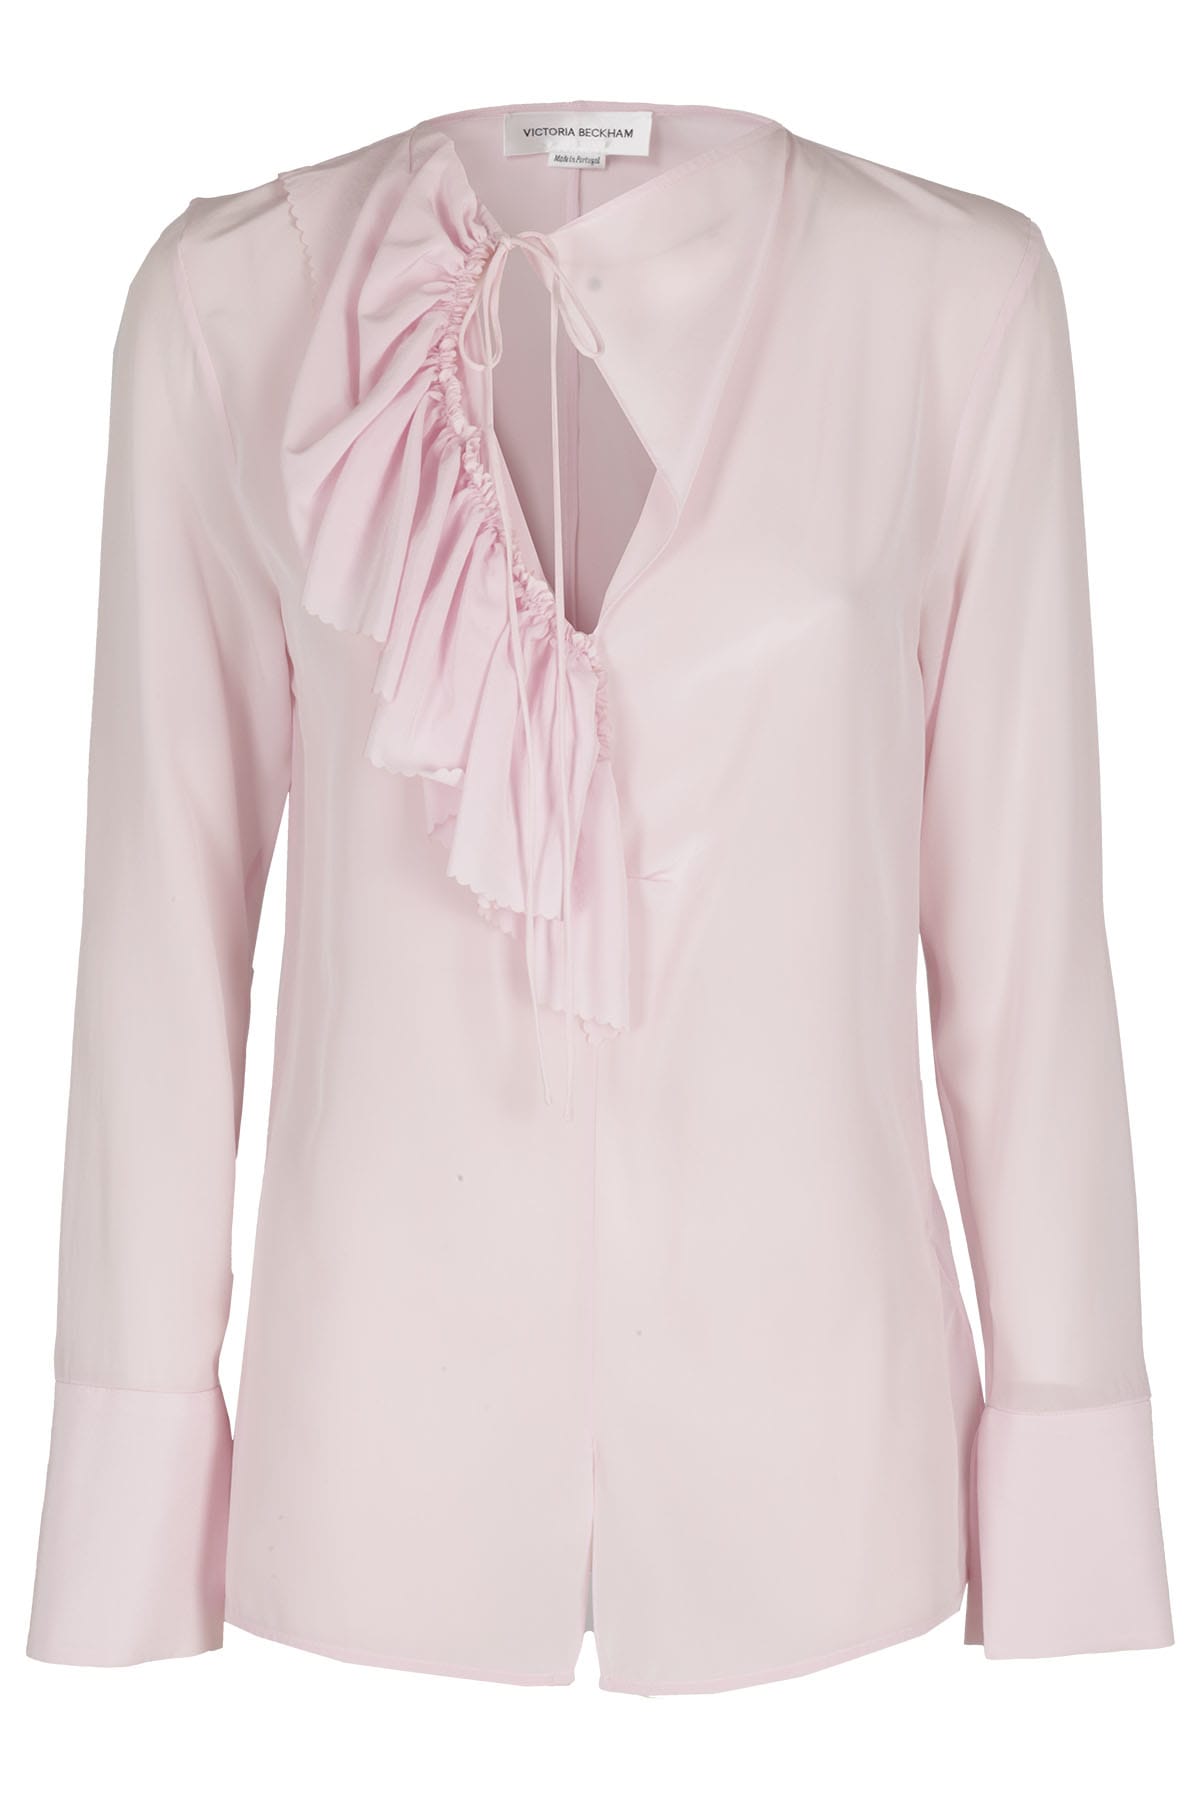 Victoria Victoria Beckham Romantic Ruffle Blouse In Candy Pink